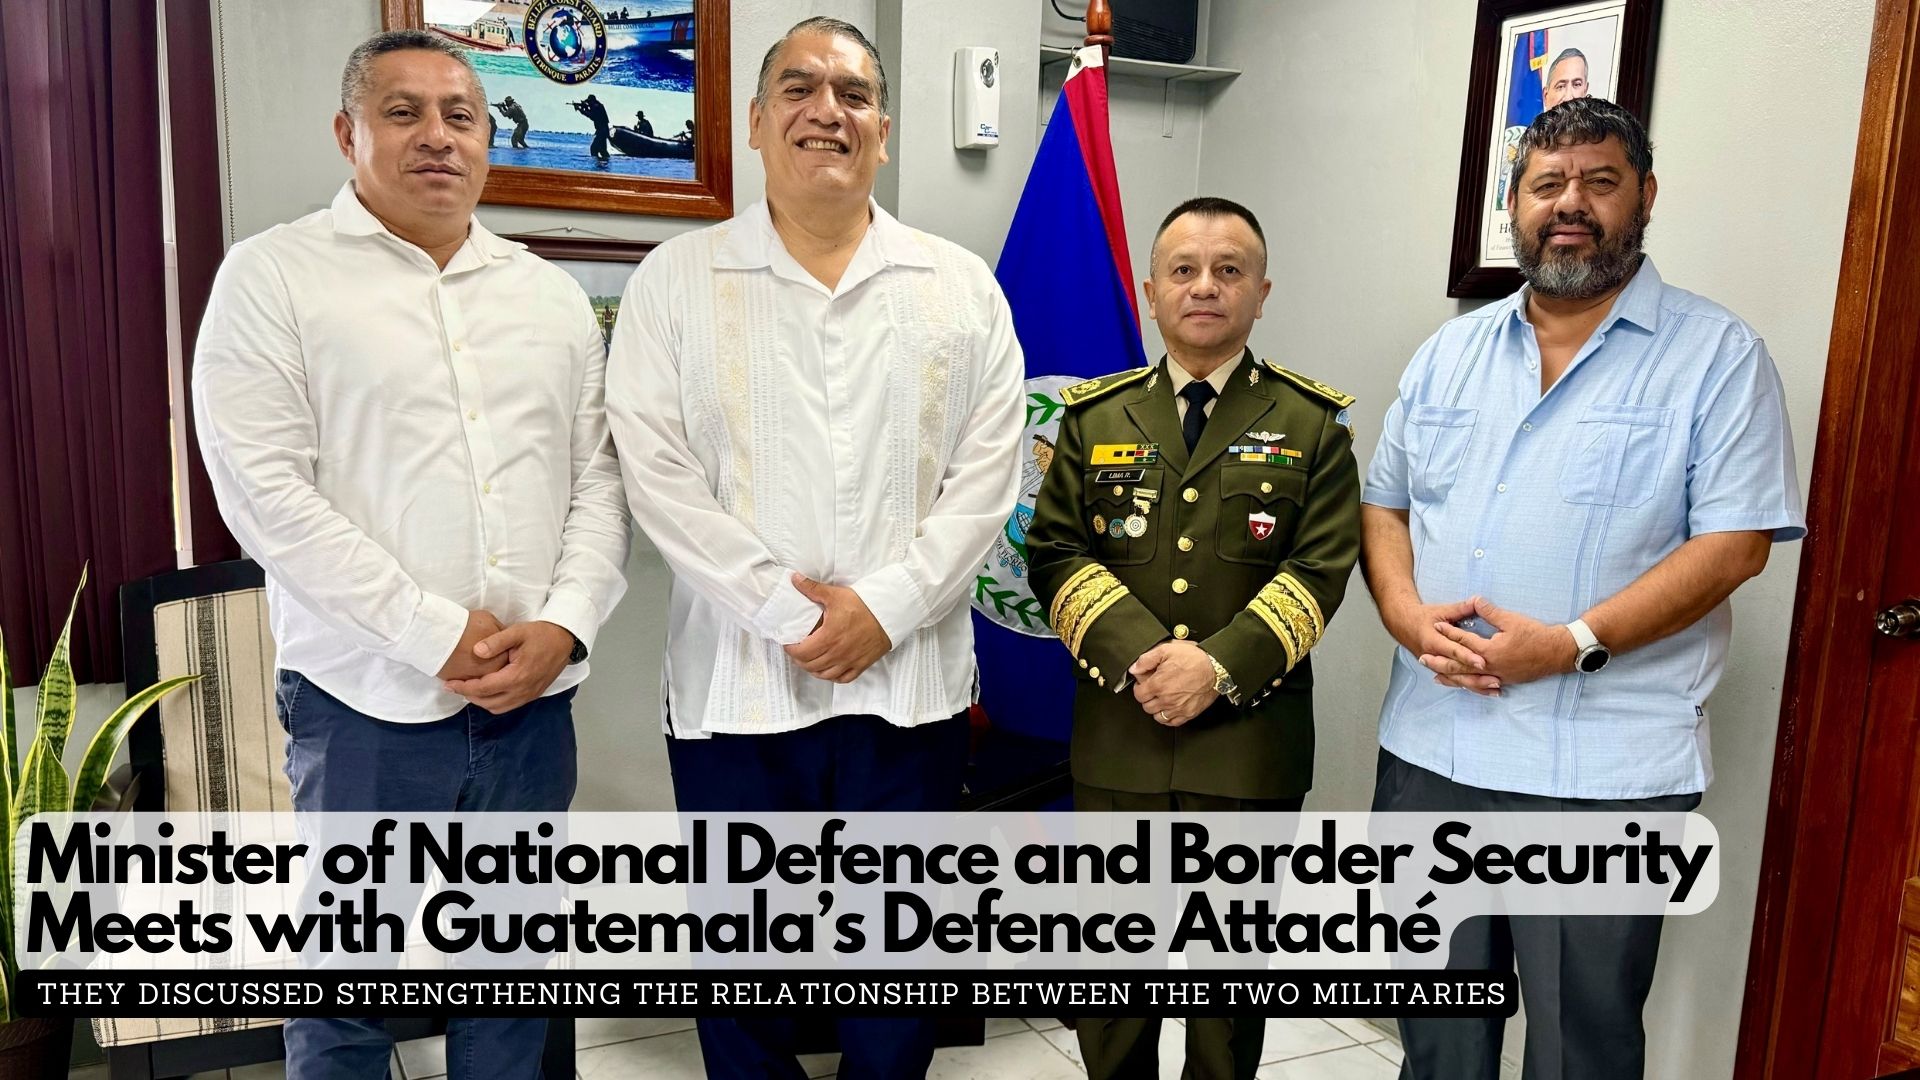 Minister of National Defence and Border Security Meets with Guatemala’s Defence Attaché